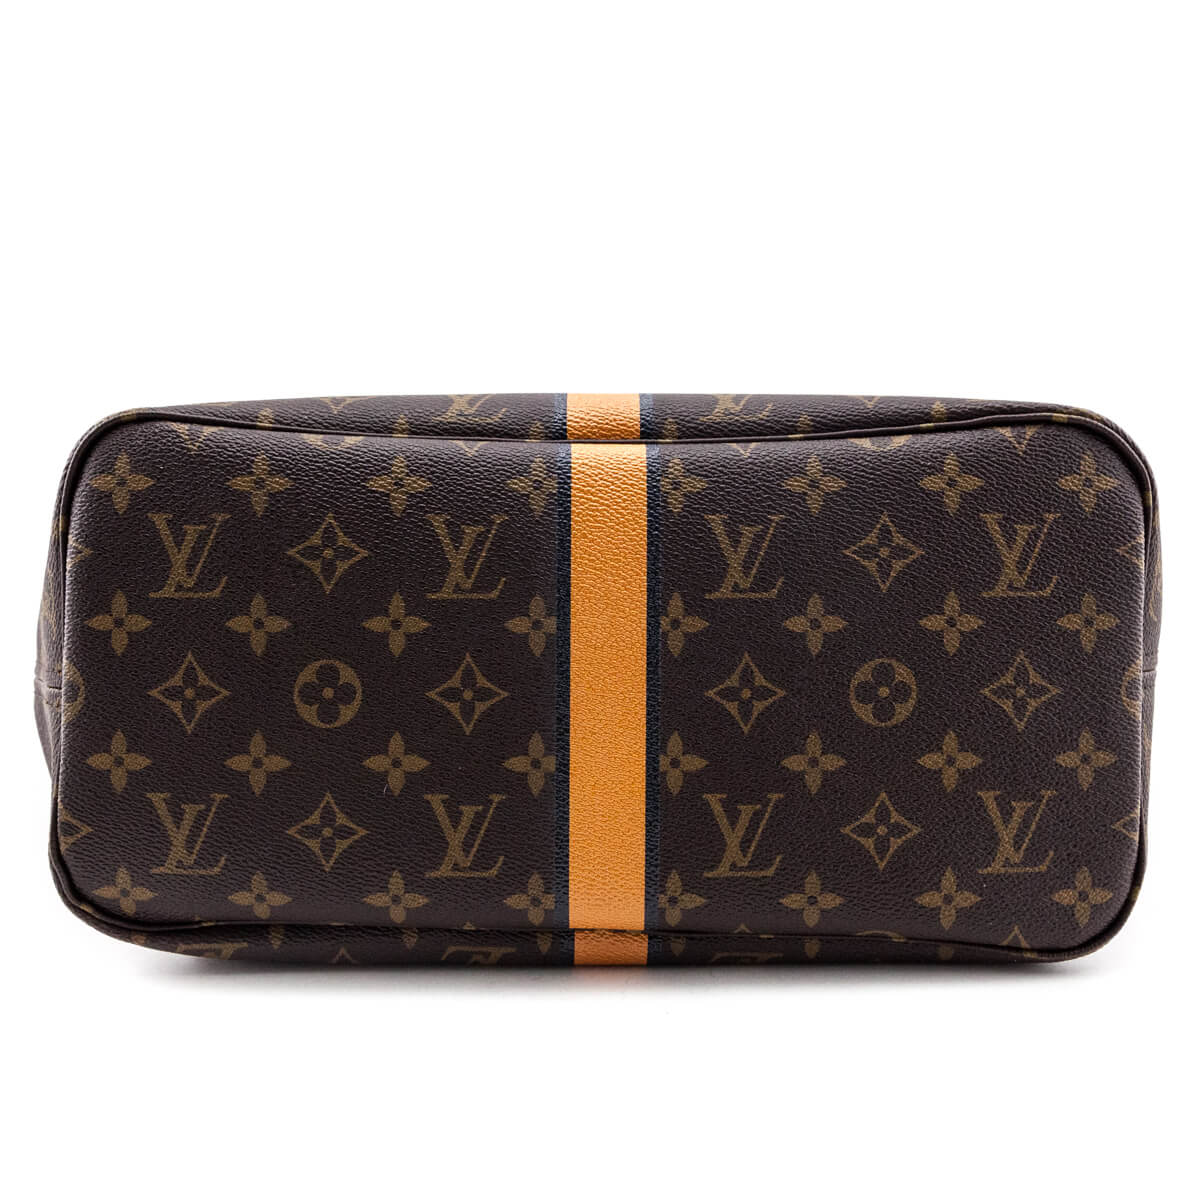 Louis Vuitton Monogram My LV Heritage Neverfull MM W/ Pouch - Love that Bag etc - Preowned Authentic Designer Handbags & Preloved Fashions